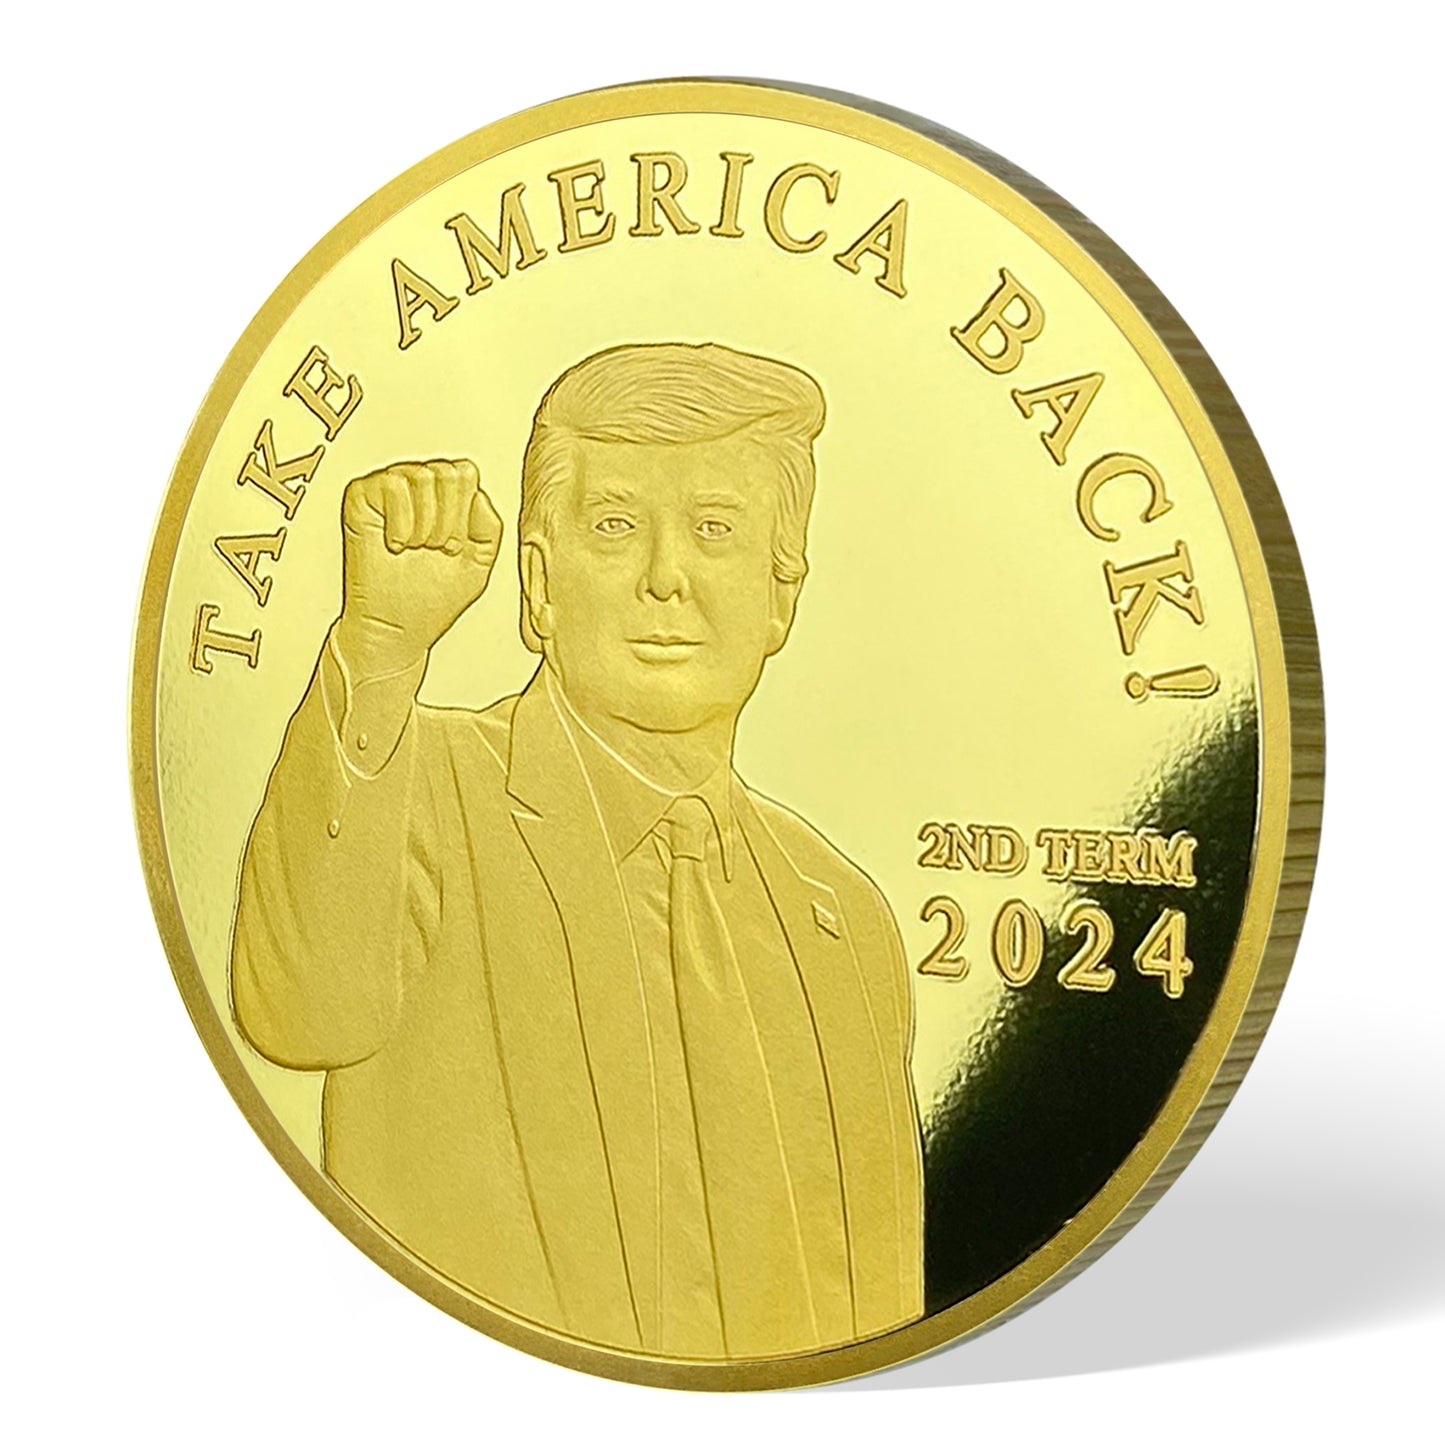 Trump 2024 Take America Back Challenge Coin 3D Gold Finish Collectible Gift Coin